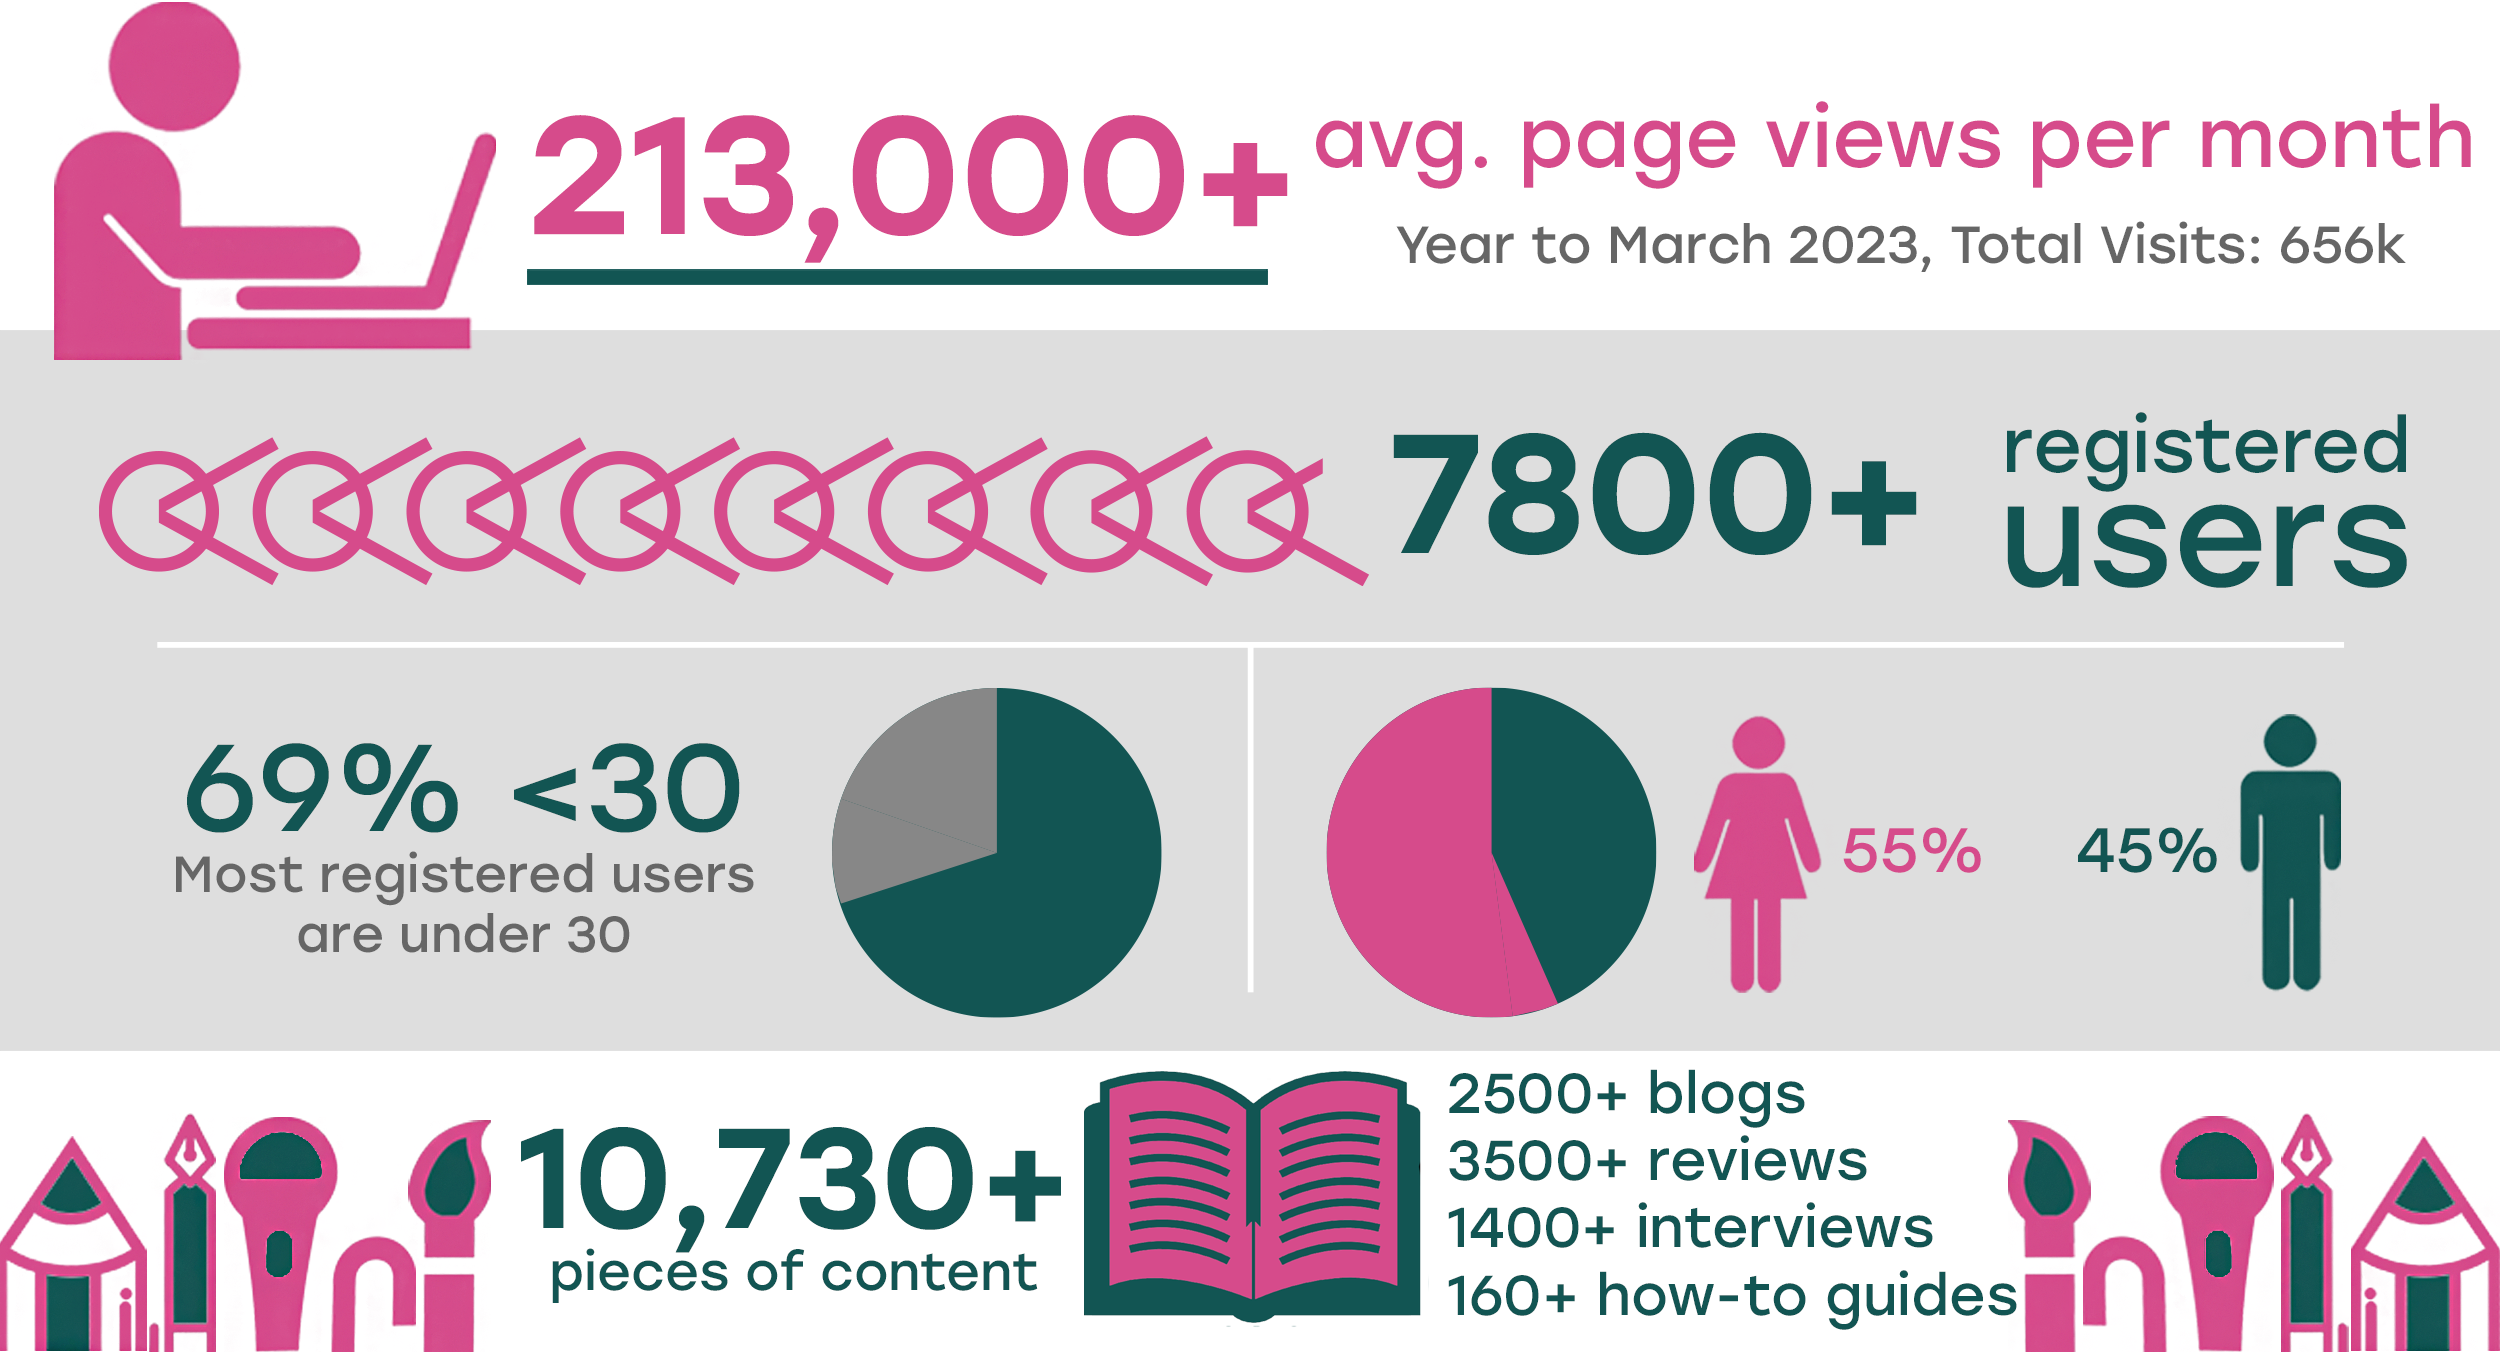 67000+ page views per month and 450k visits achieved in 2020-21